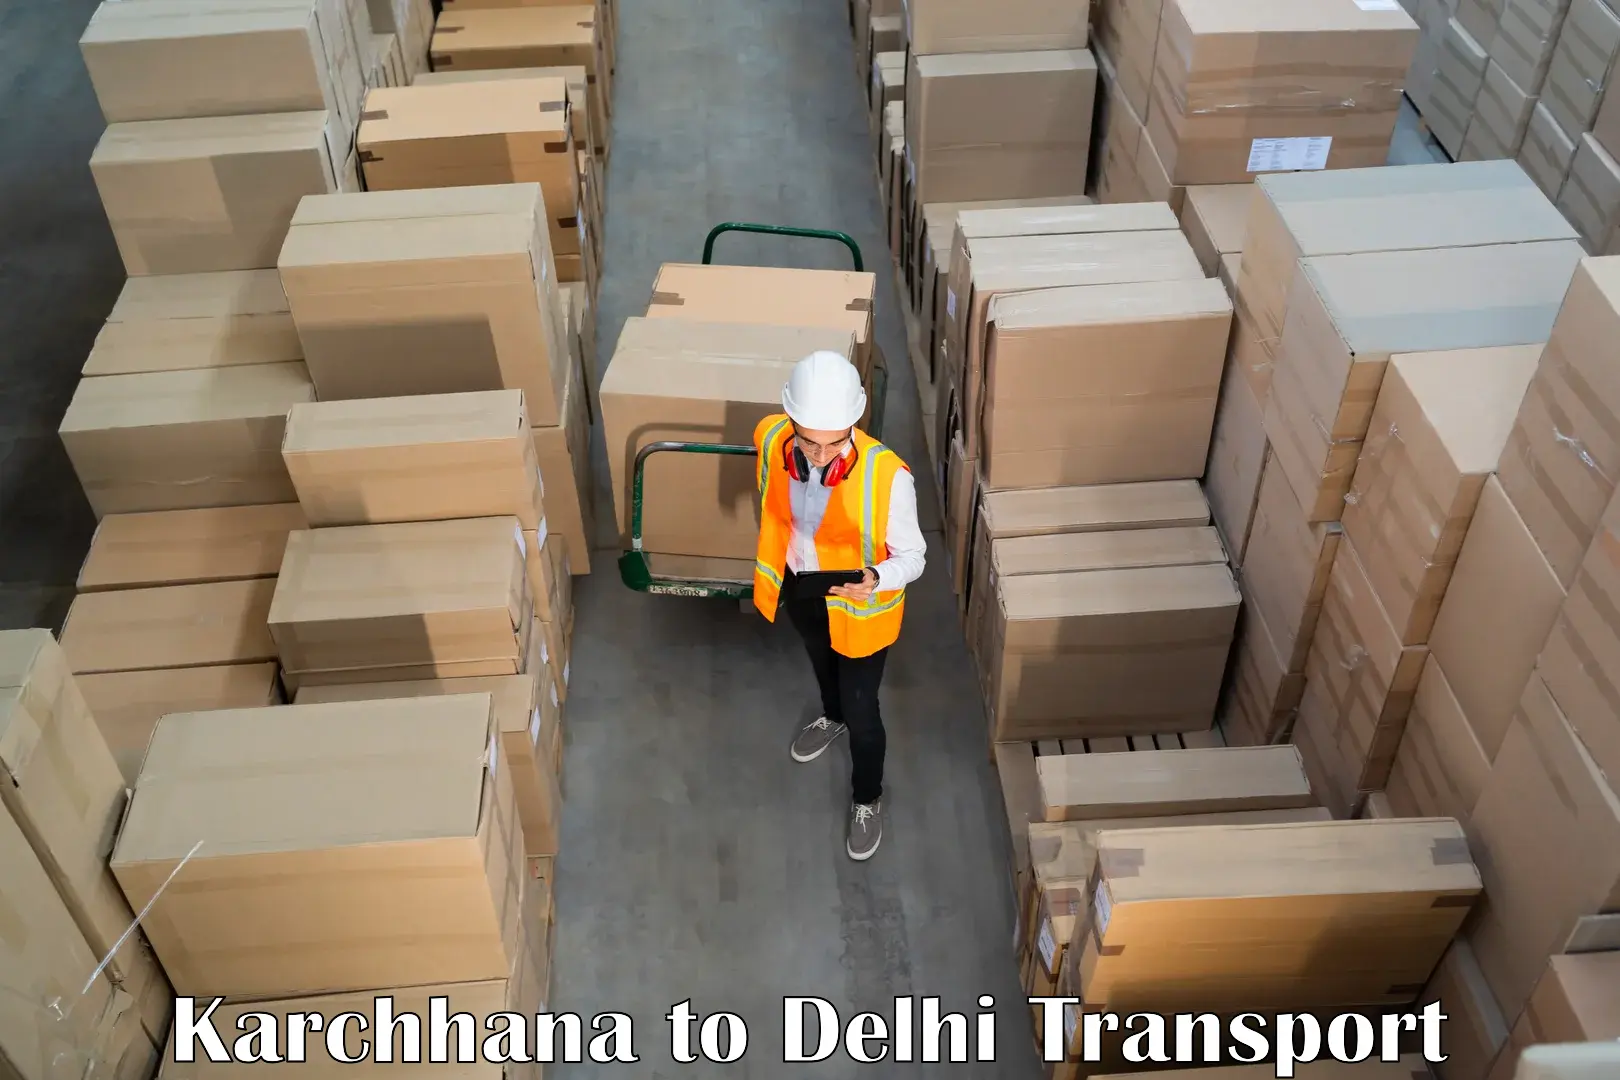 Part load transport service in India Karchhana to Lodhi Road